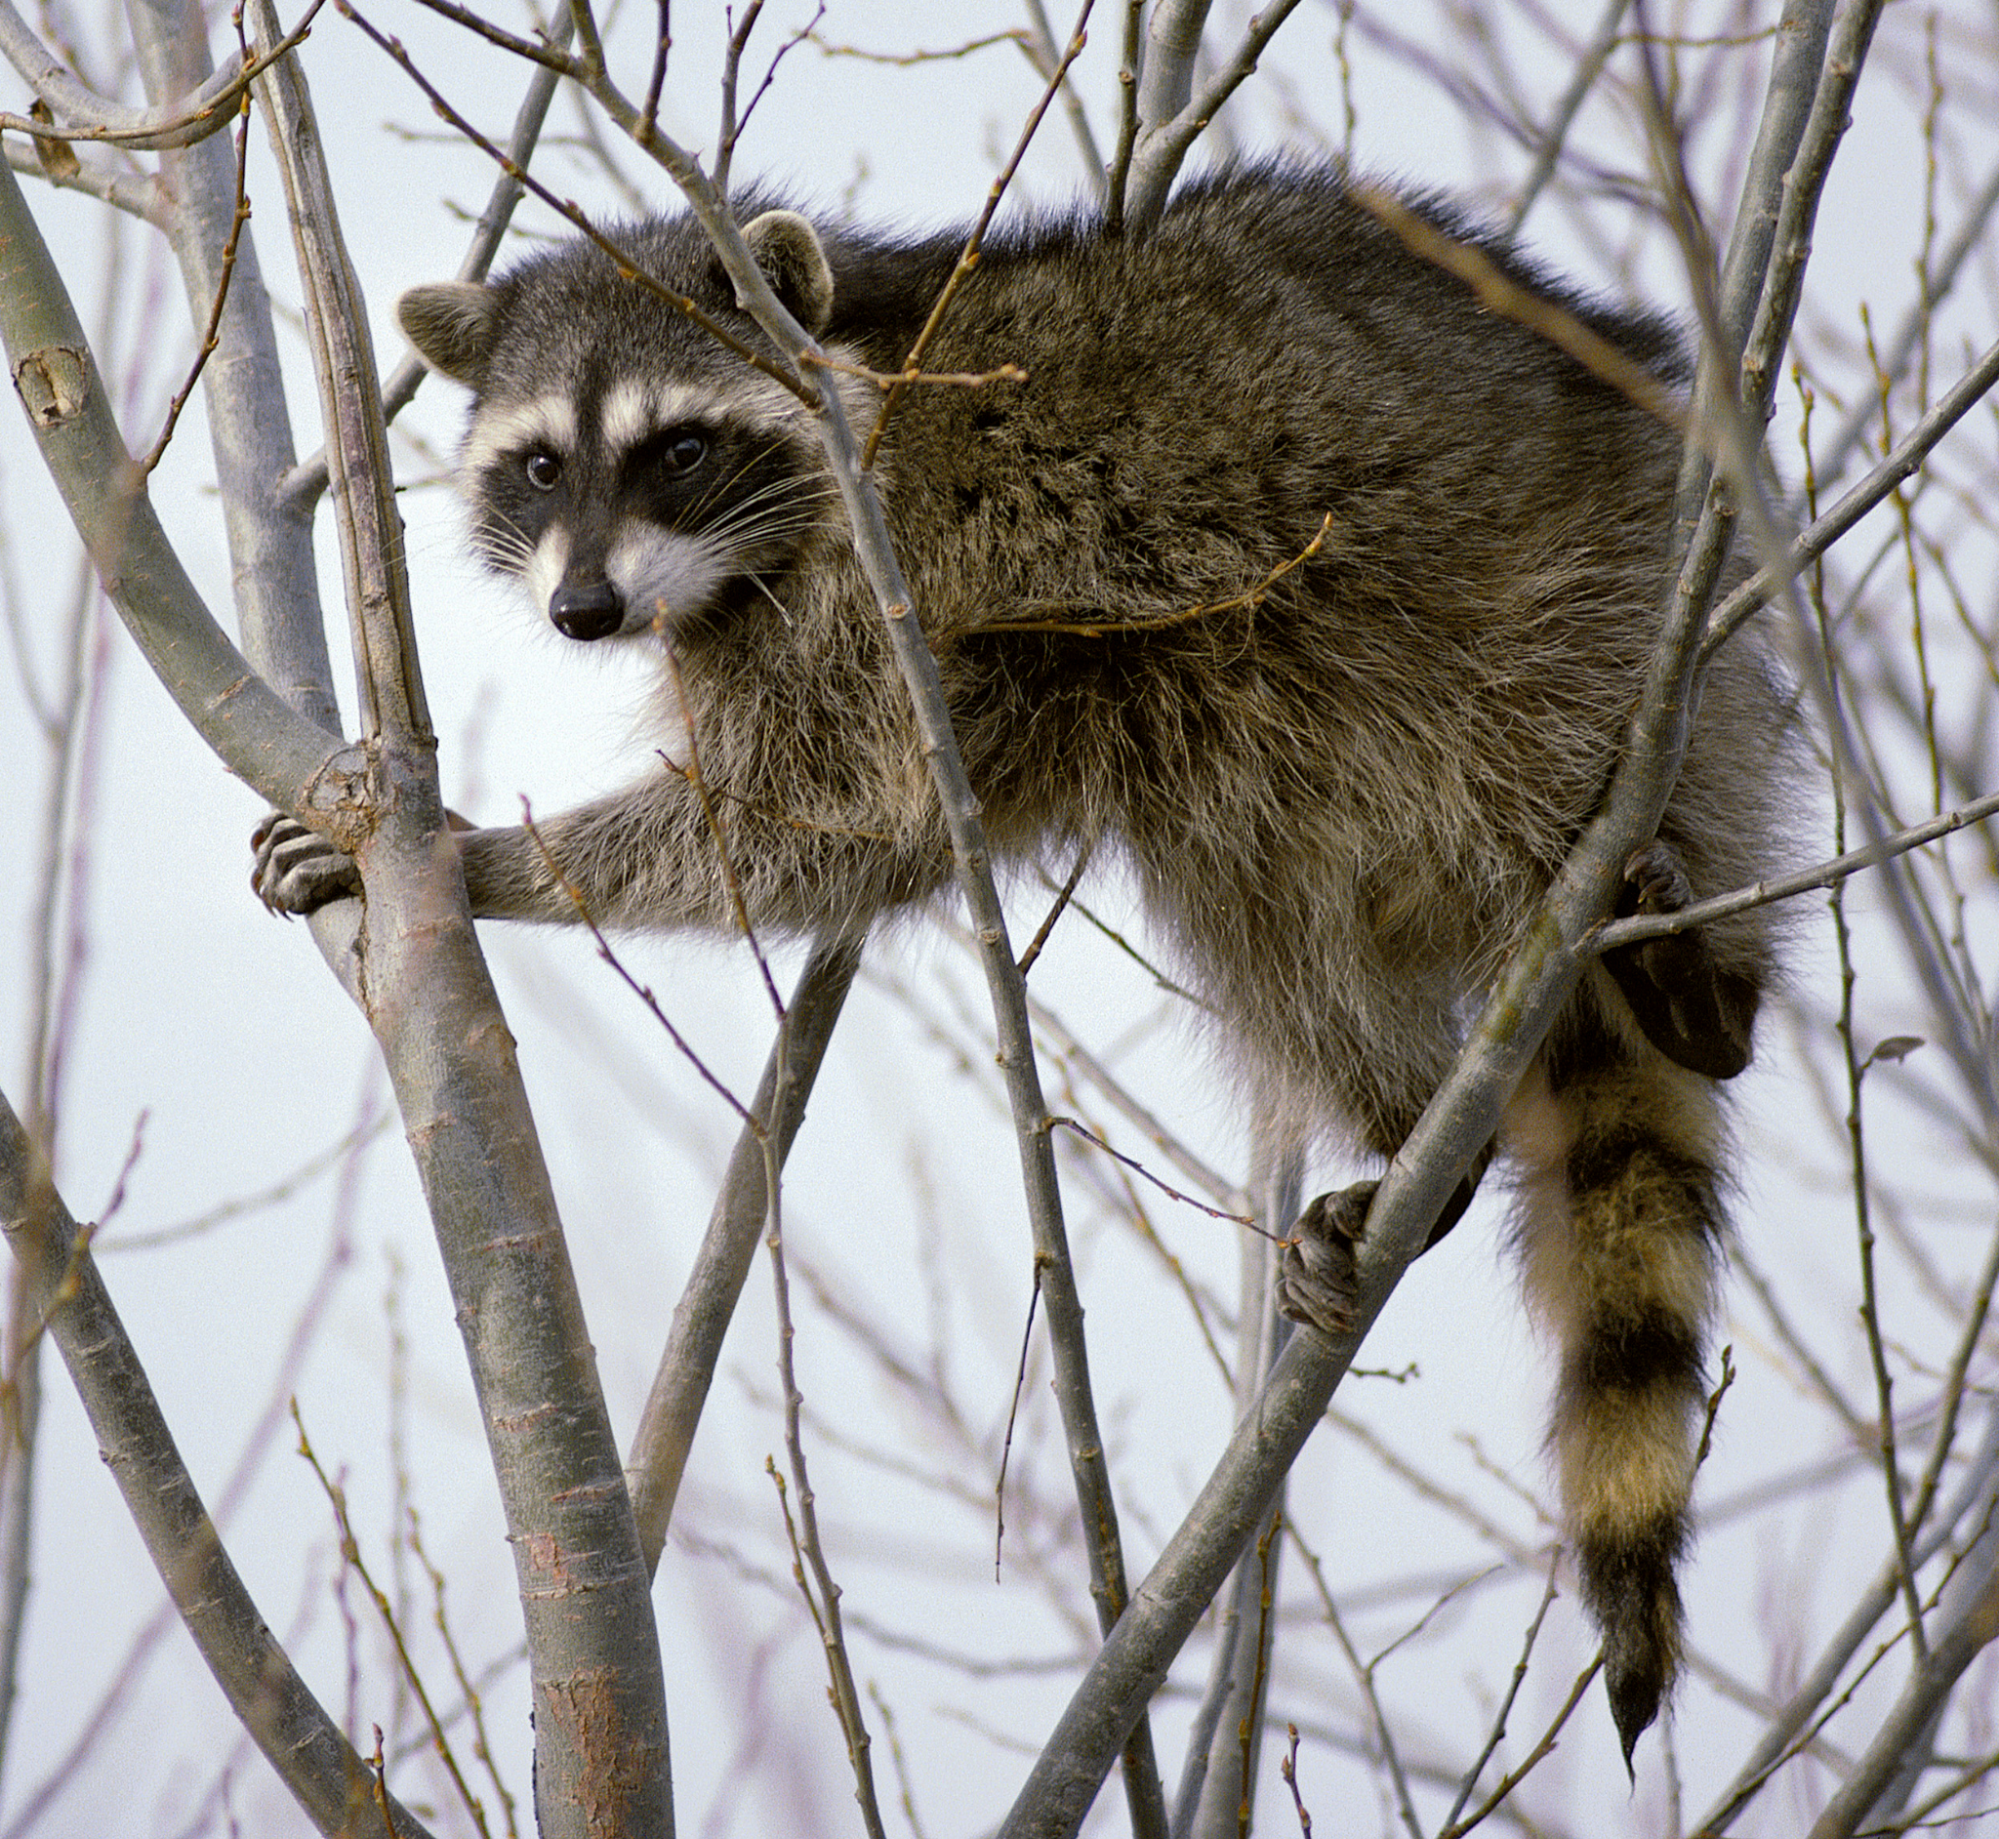 Gray furry animal grasping several branches atop a tree. Its eyes are surrounded by mask-like black fur, which is further surrounded by white fur; its tail has black rings.